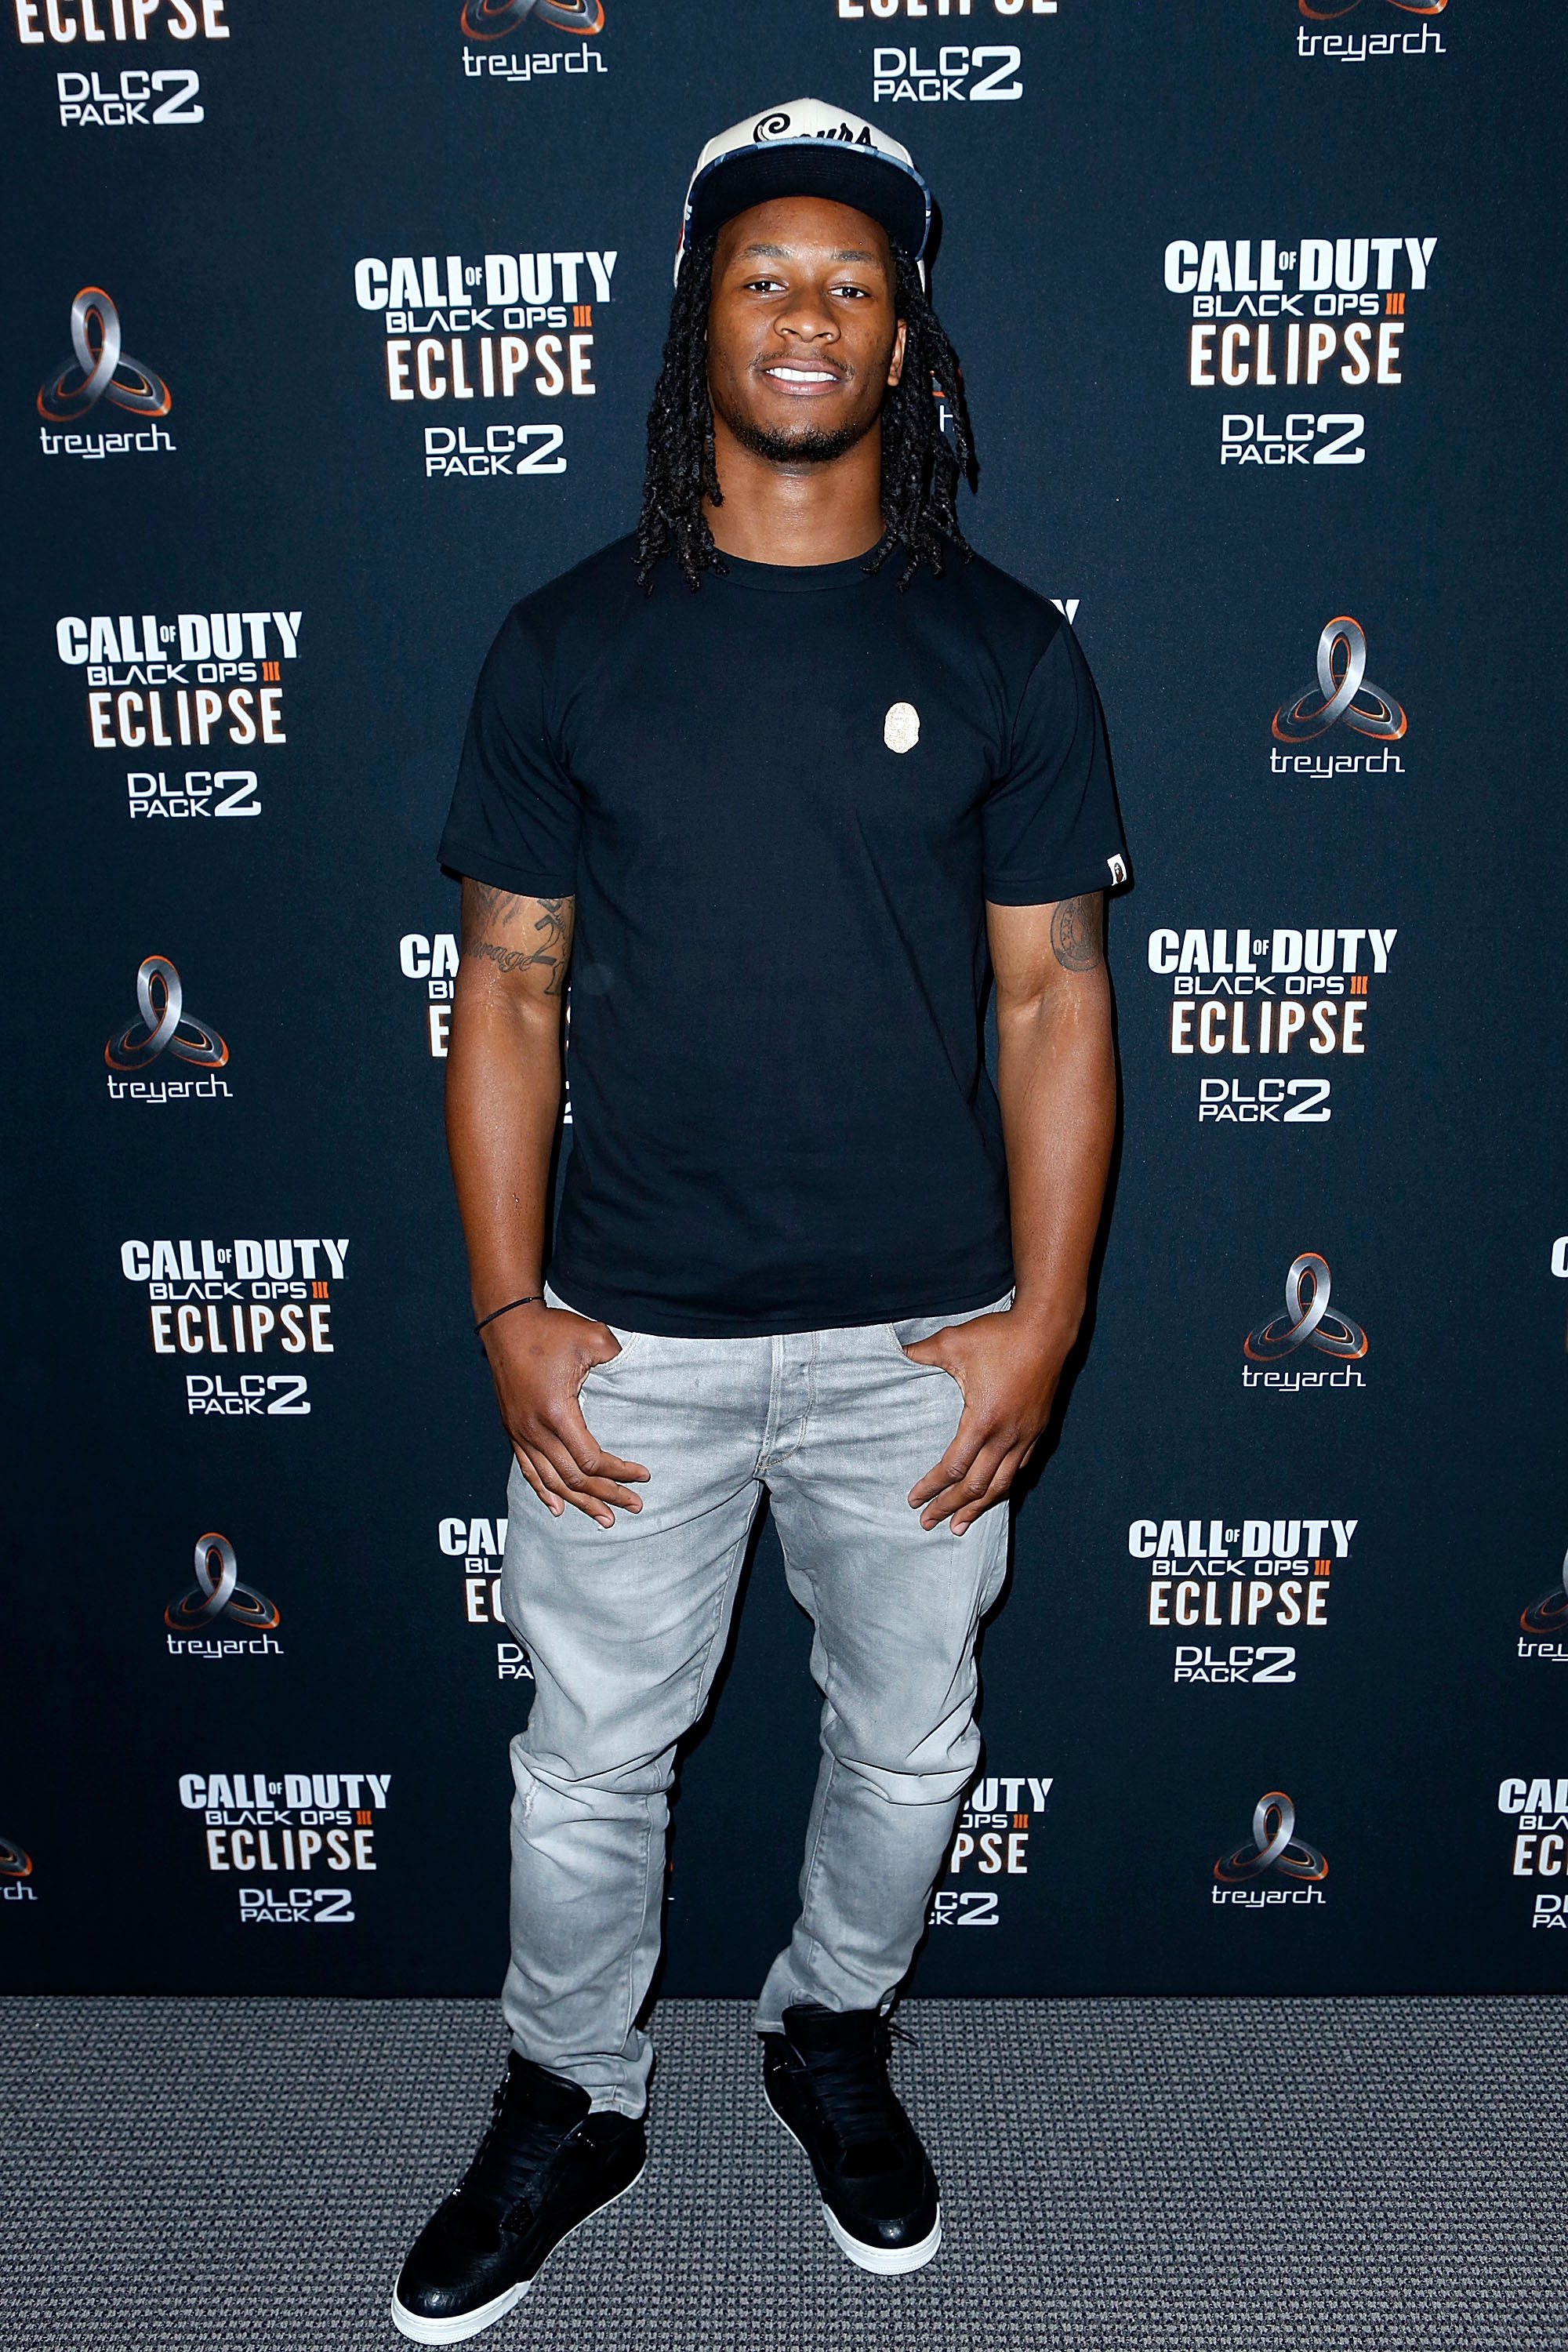 Los Angeles Rams Running Back Todd Gurley Goes Head-To-Hear Against New York Jets Running Back Matt Forte In Call Of Duty: Black Ops3 To Celebrate The Launch Of Eclipse DLC